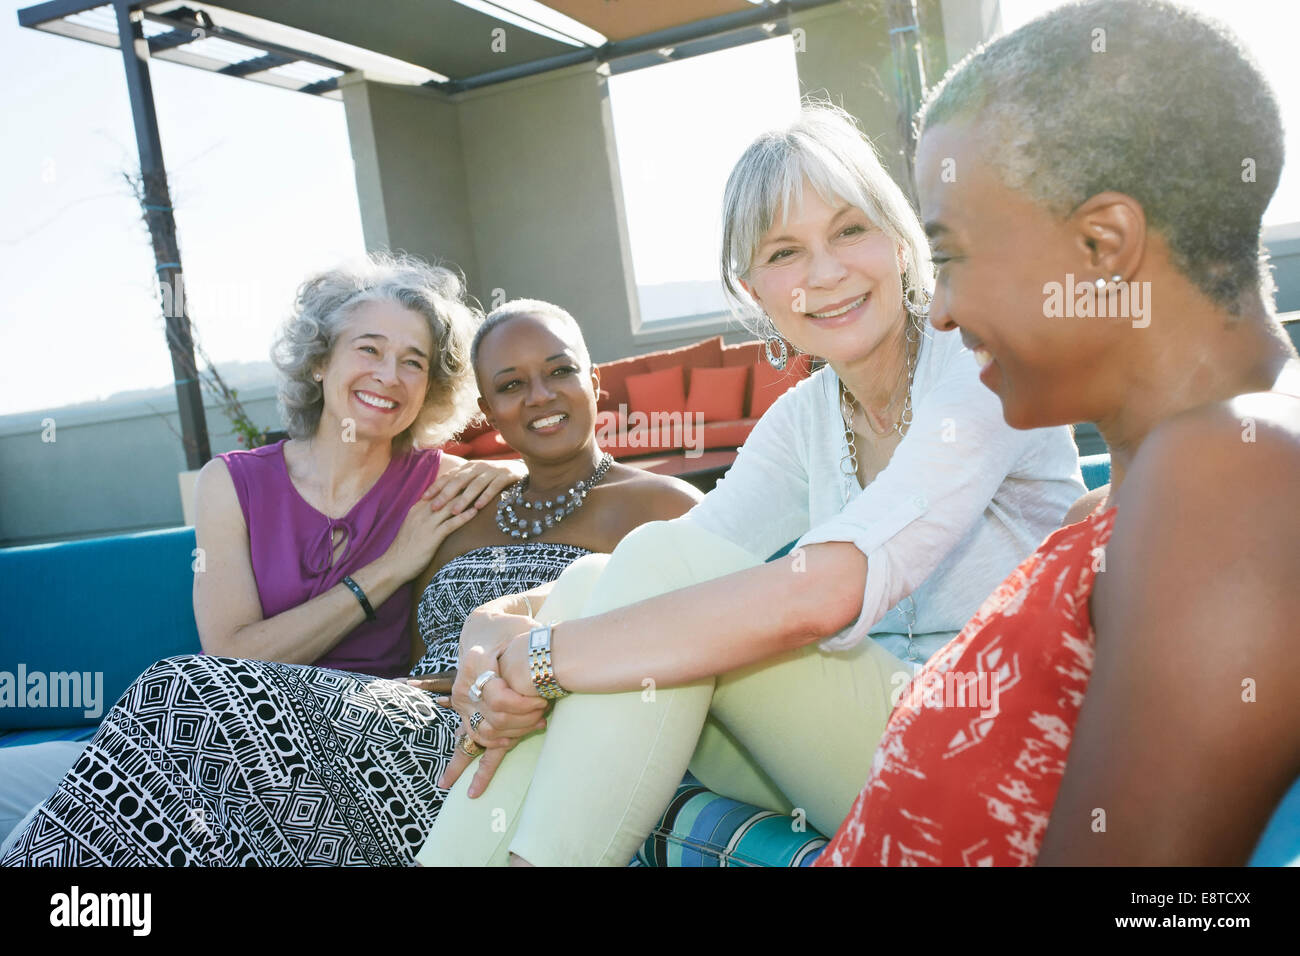 Women relaxing together on urban rooftop Stock Photo